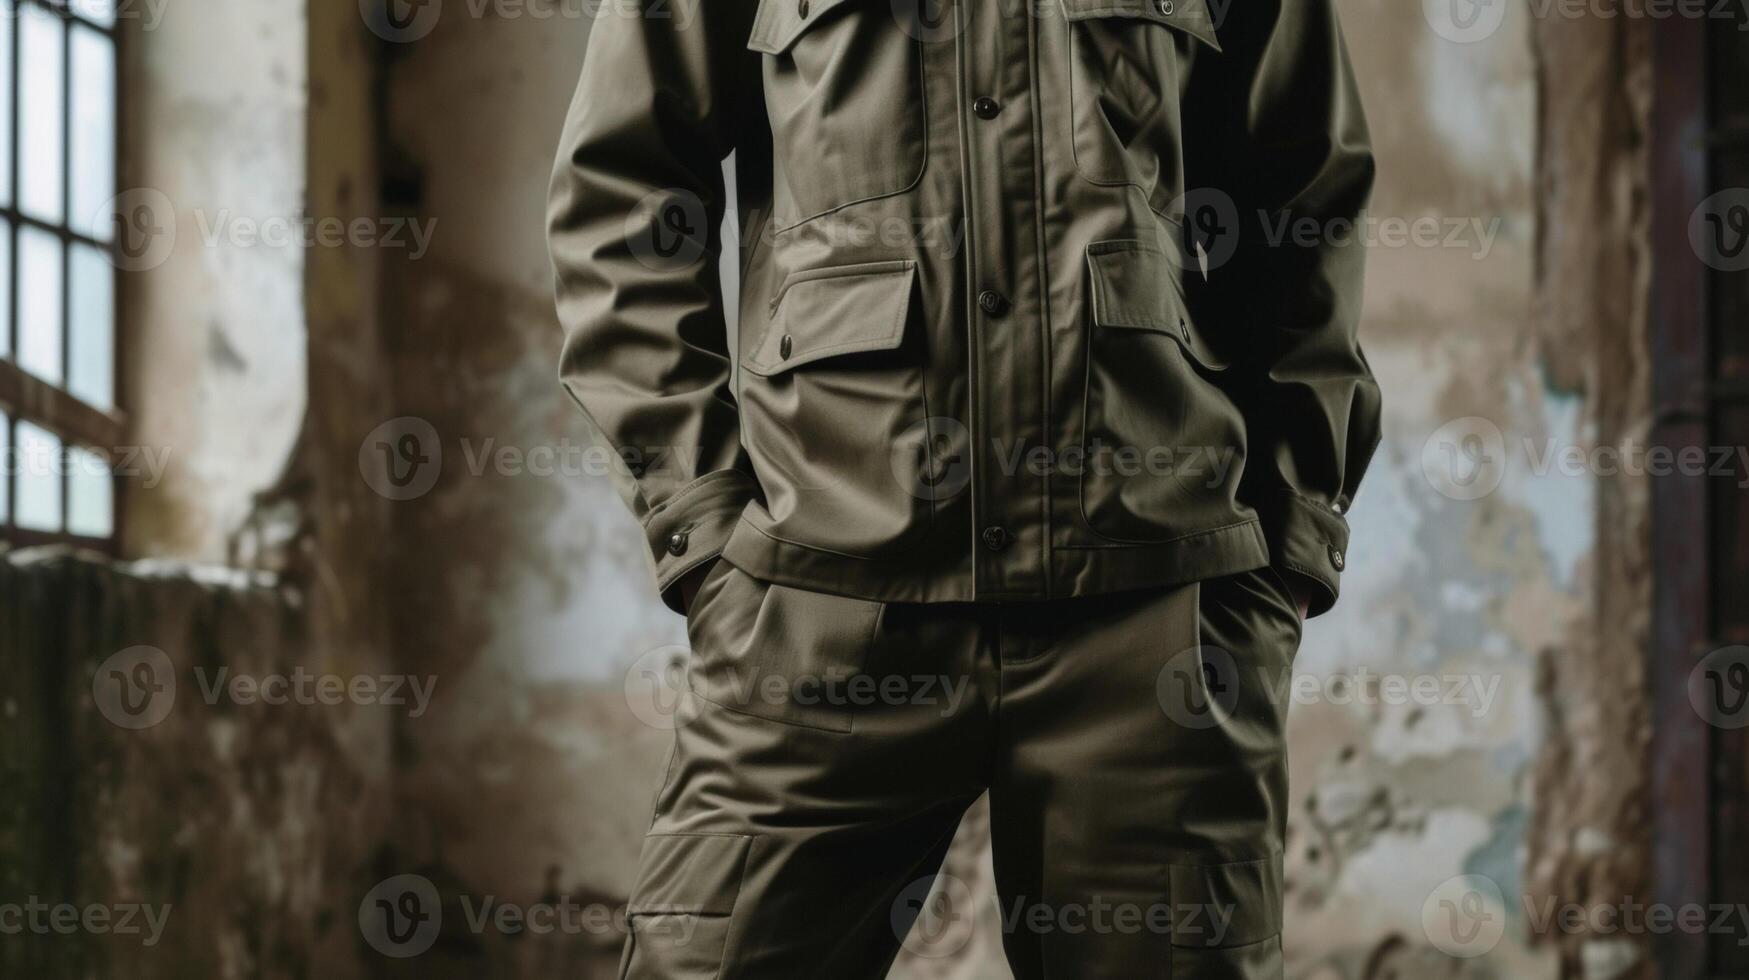 A powerful khaki jumpsuit with doubleed button detailing inspired by traditional military uniforms. The perfect look for a base camp training session photo